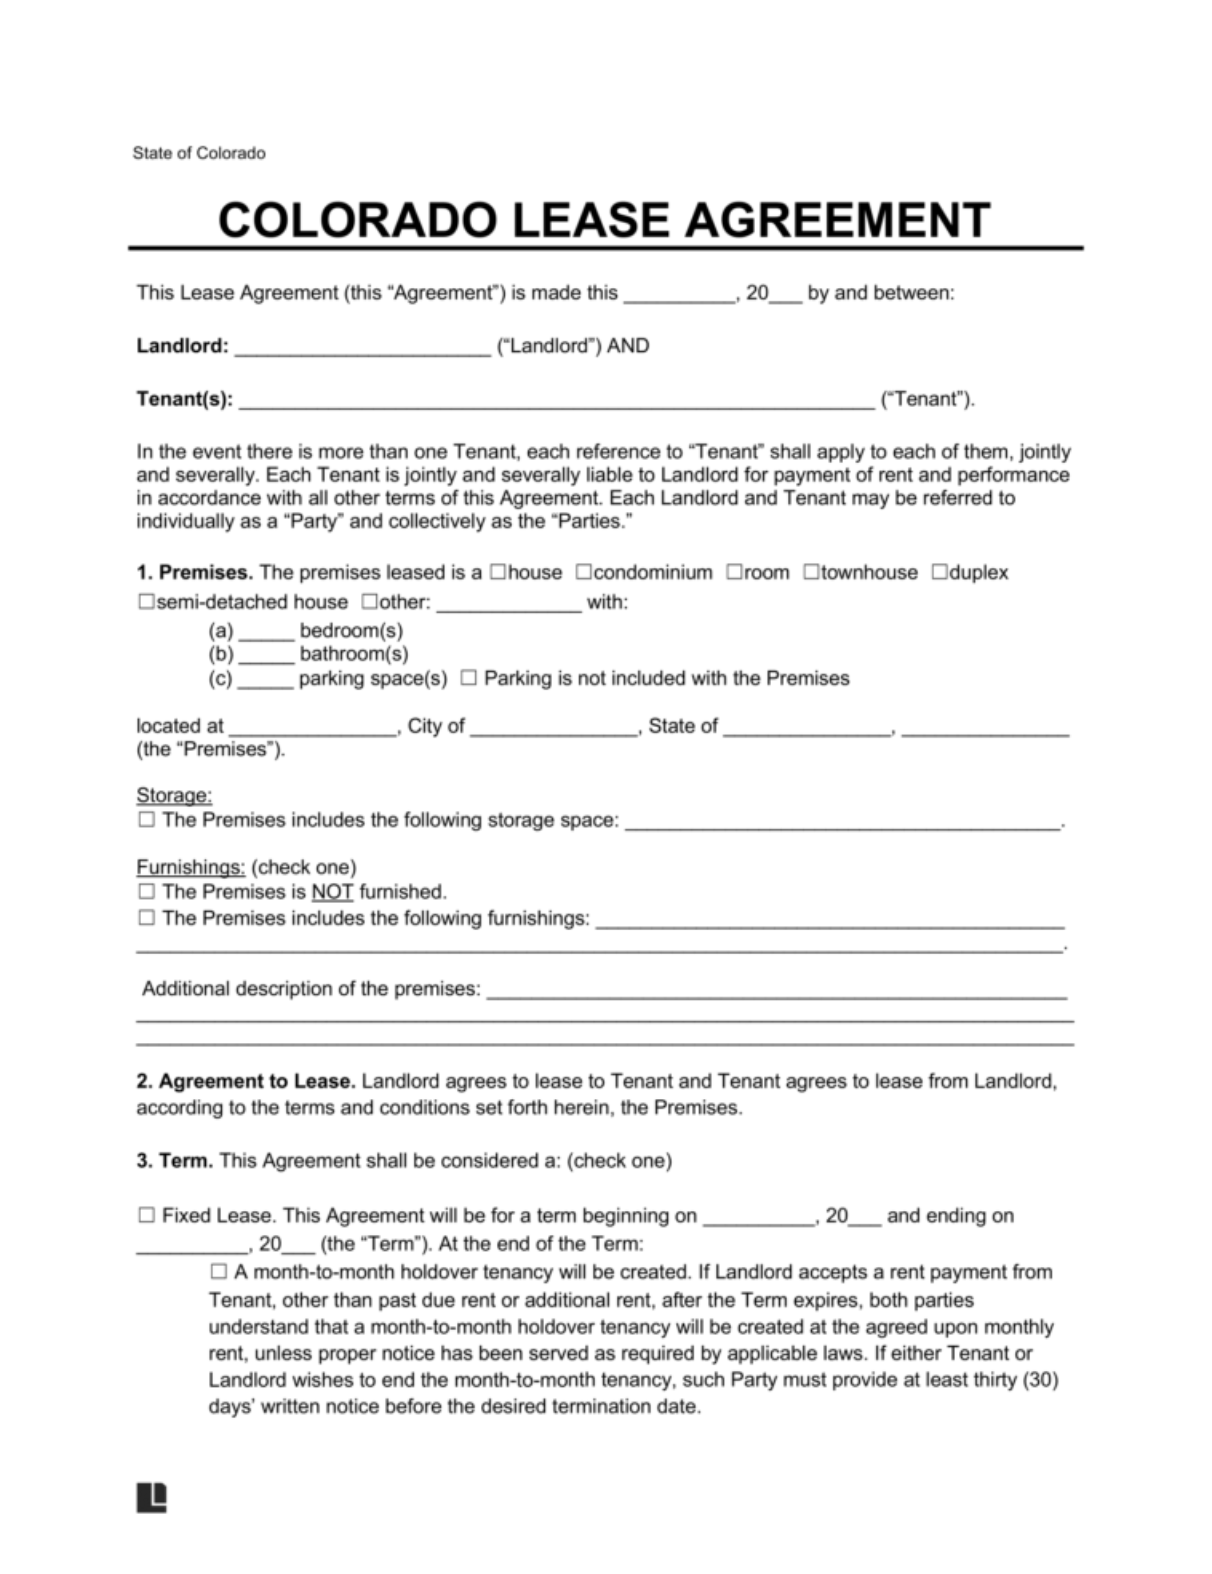 LegalTemplates Colorado Residential Lease Agreement 